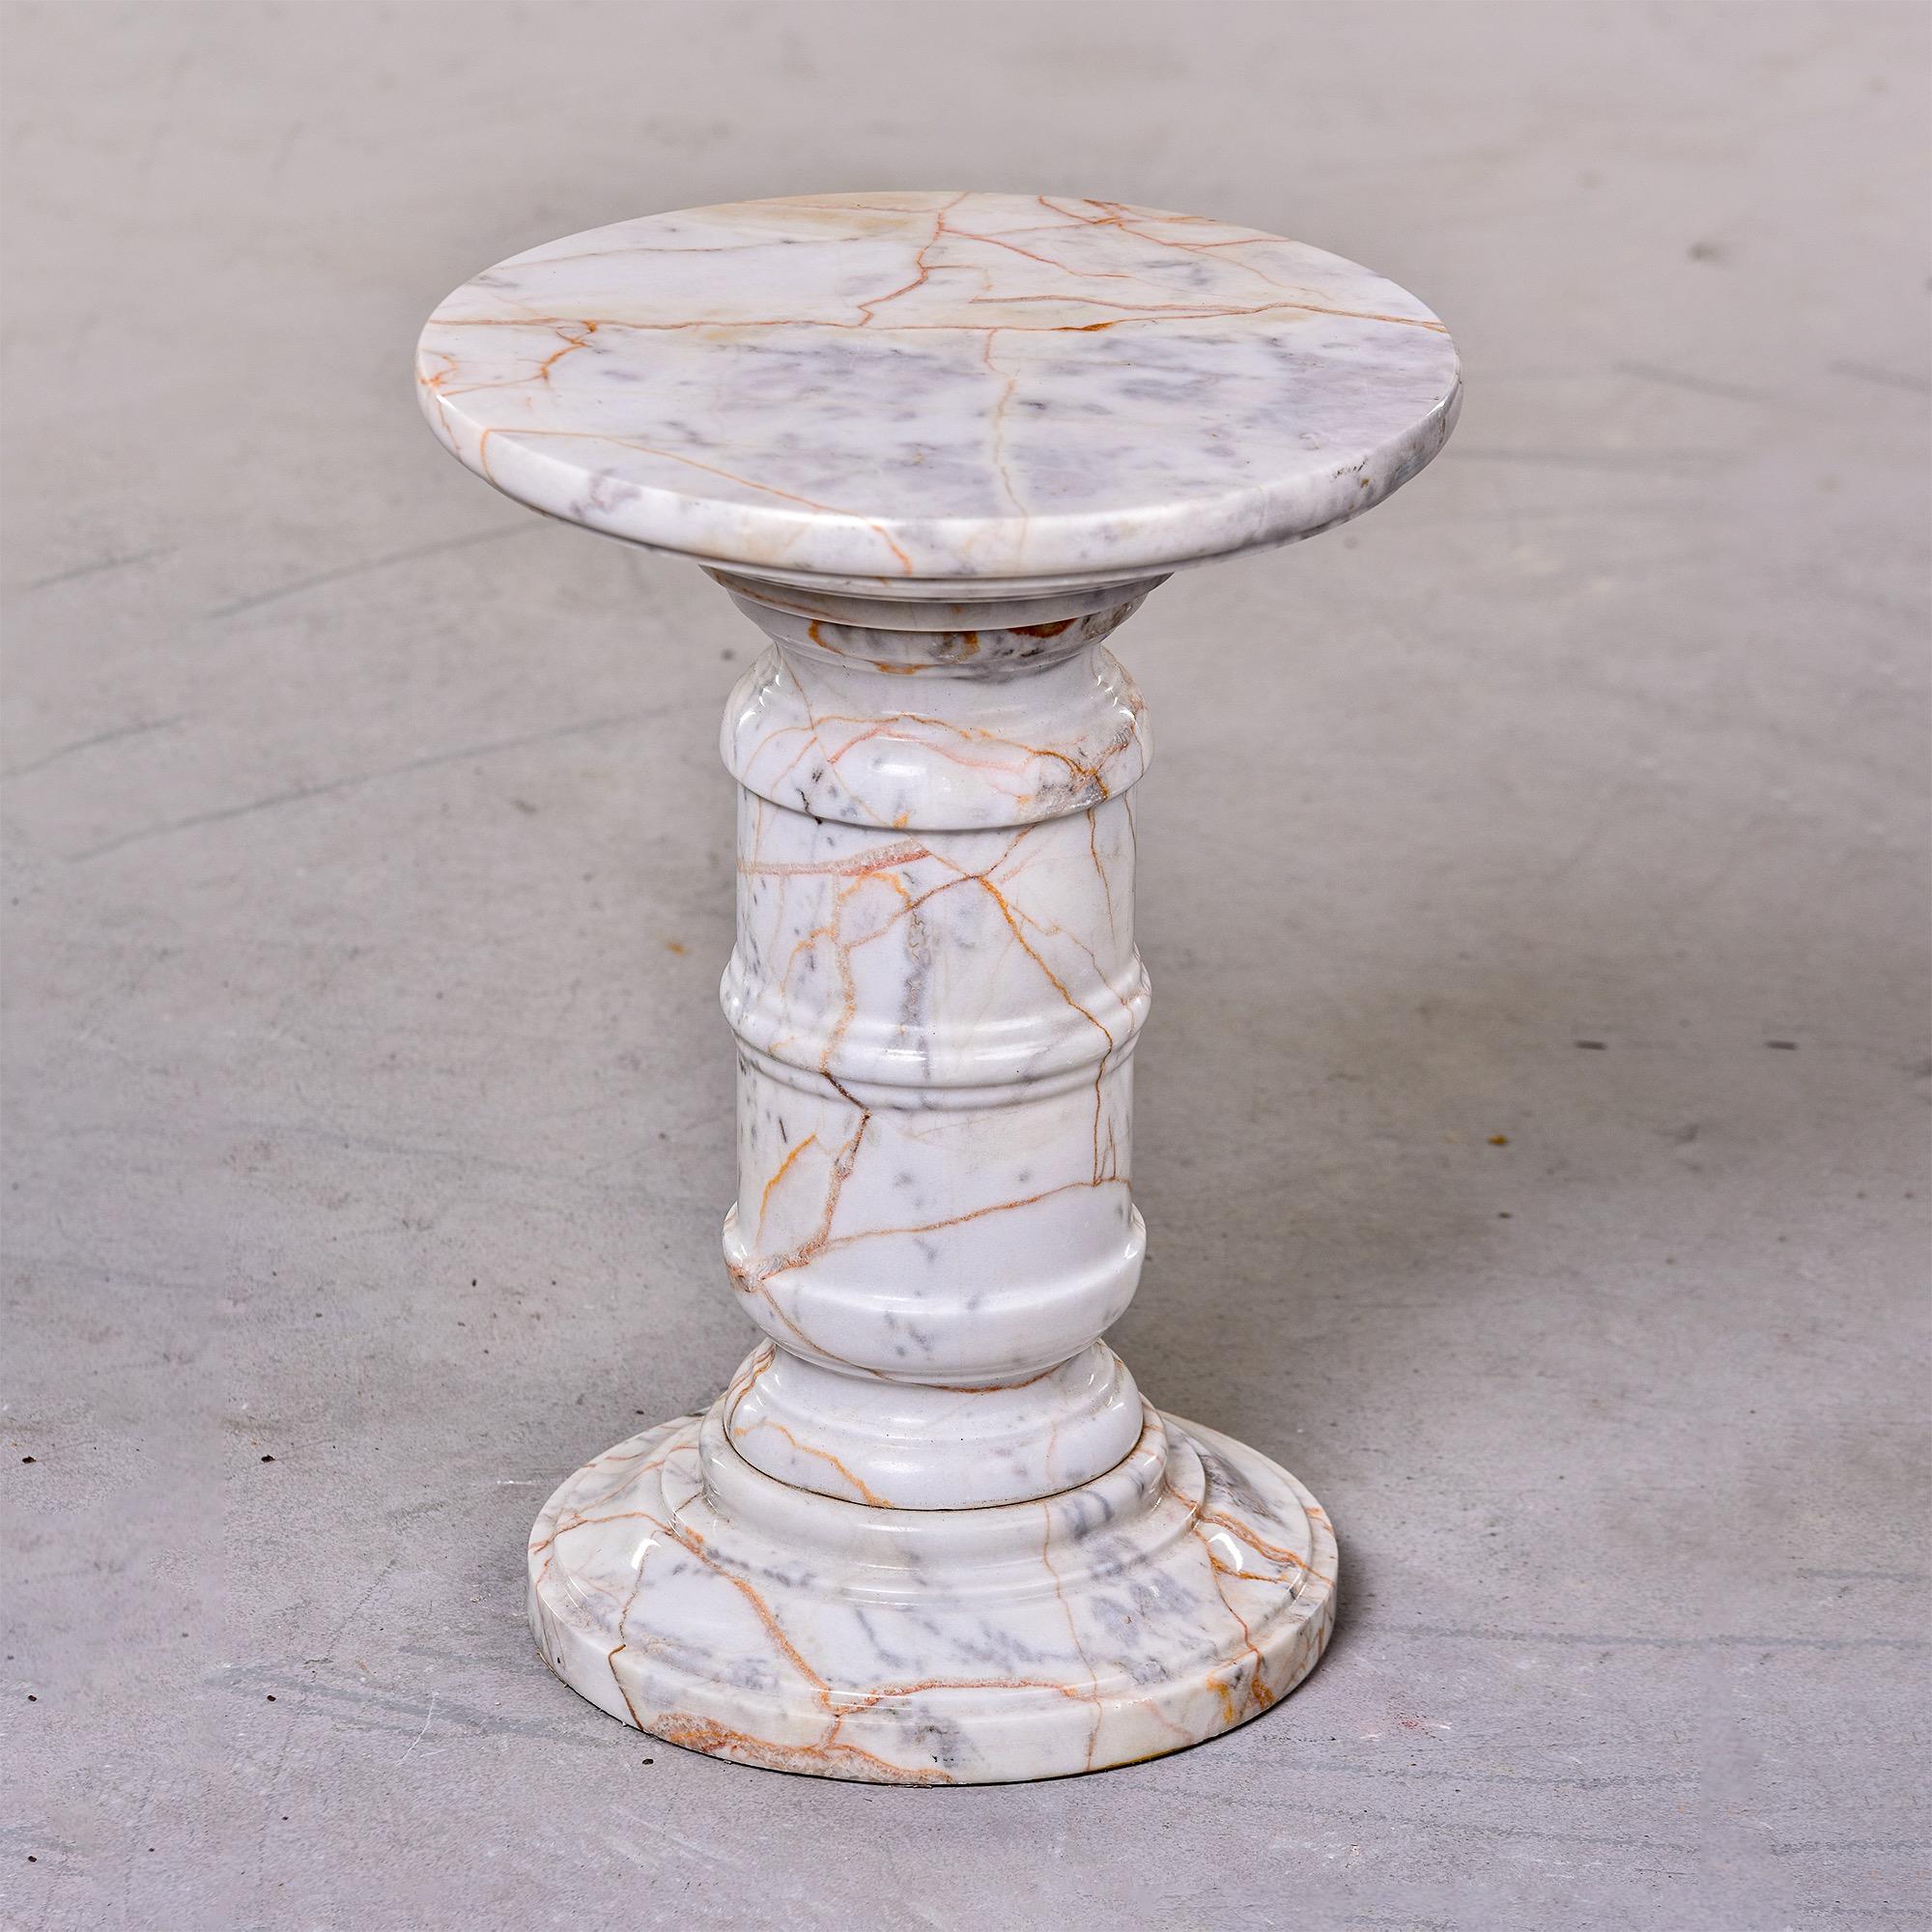 Circa 1970s small Italian marble table or stand with turned pedestal base and round top. Marble is white with streaks of gray and apricot. Multiple tables in this marble and style are available at the time of this posting. Sizes may vary slightly.